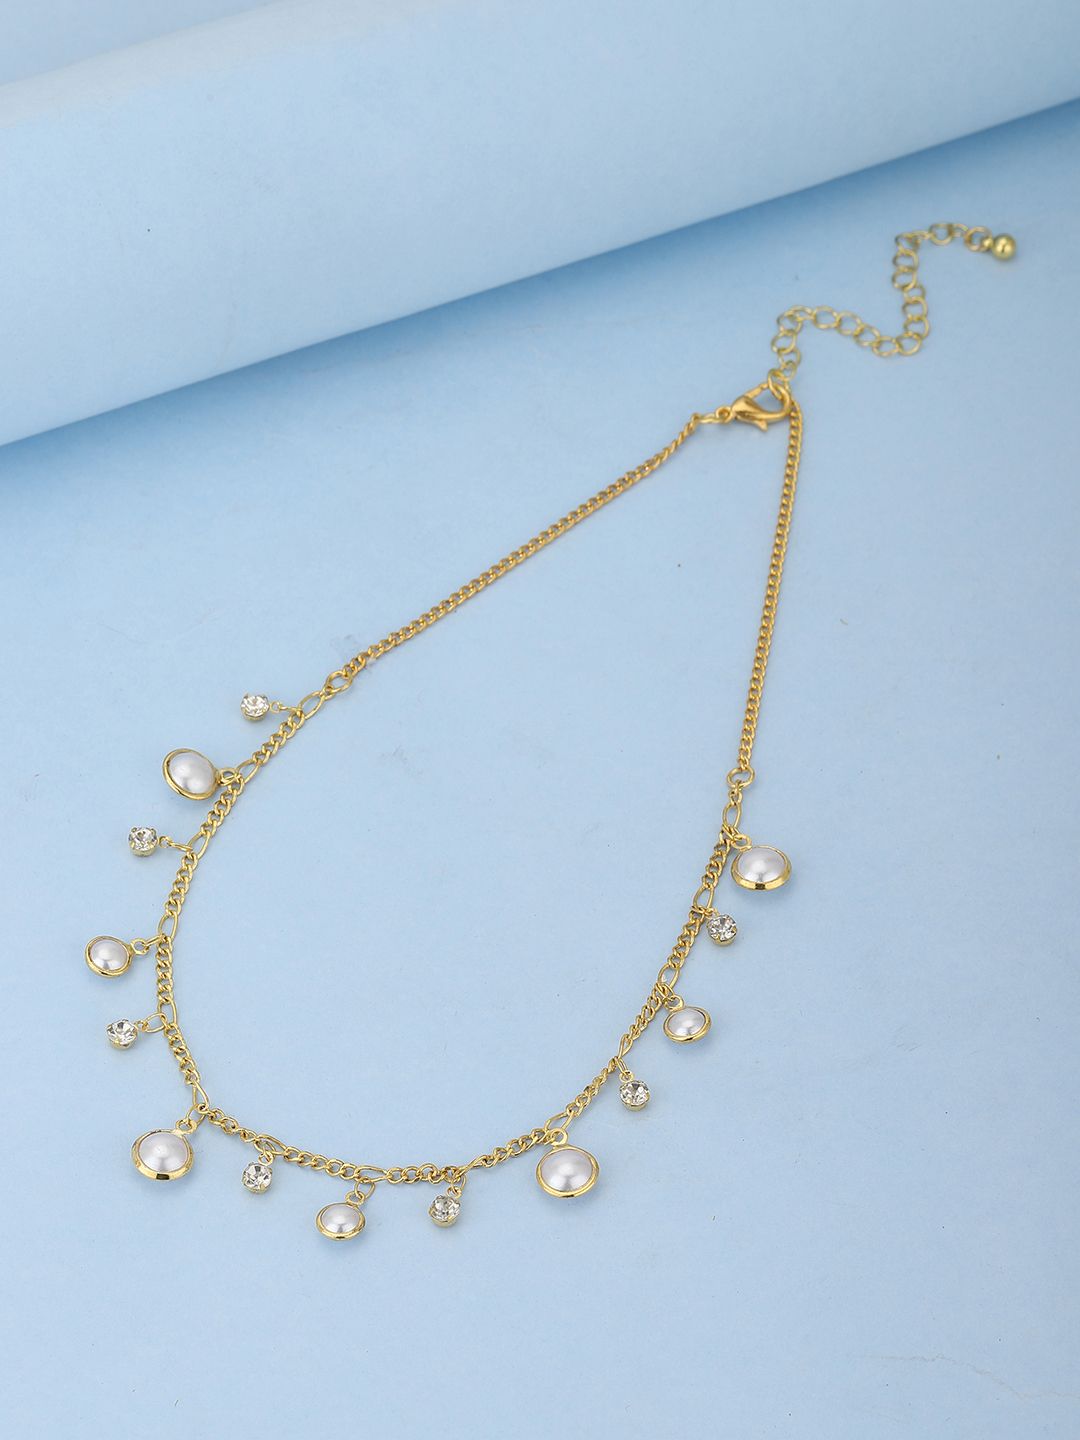 Carlton London Gold-Plated & White CZ Studded Charm Necklace Price in India